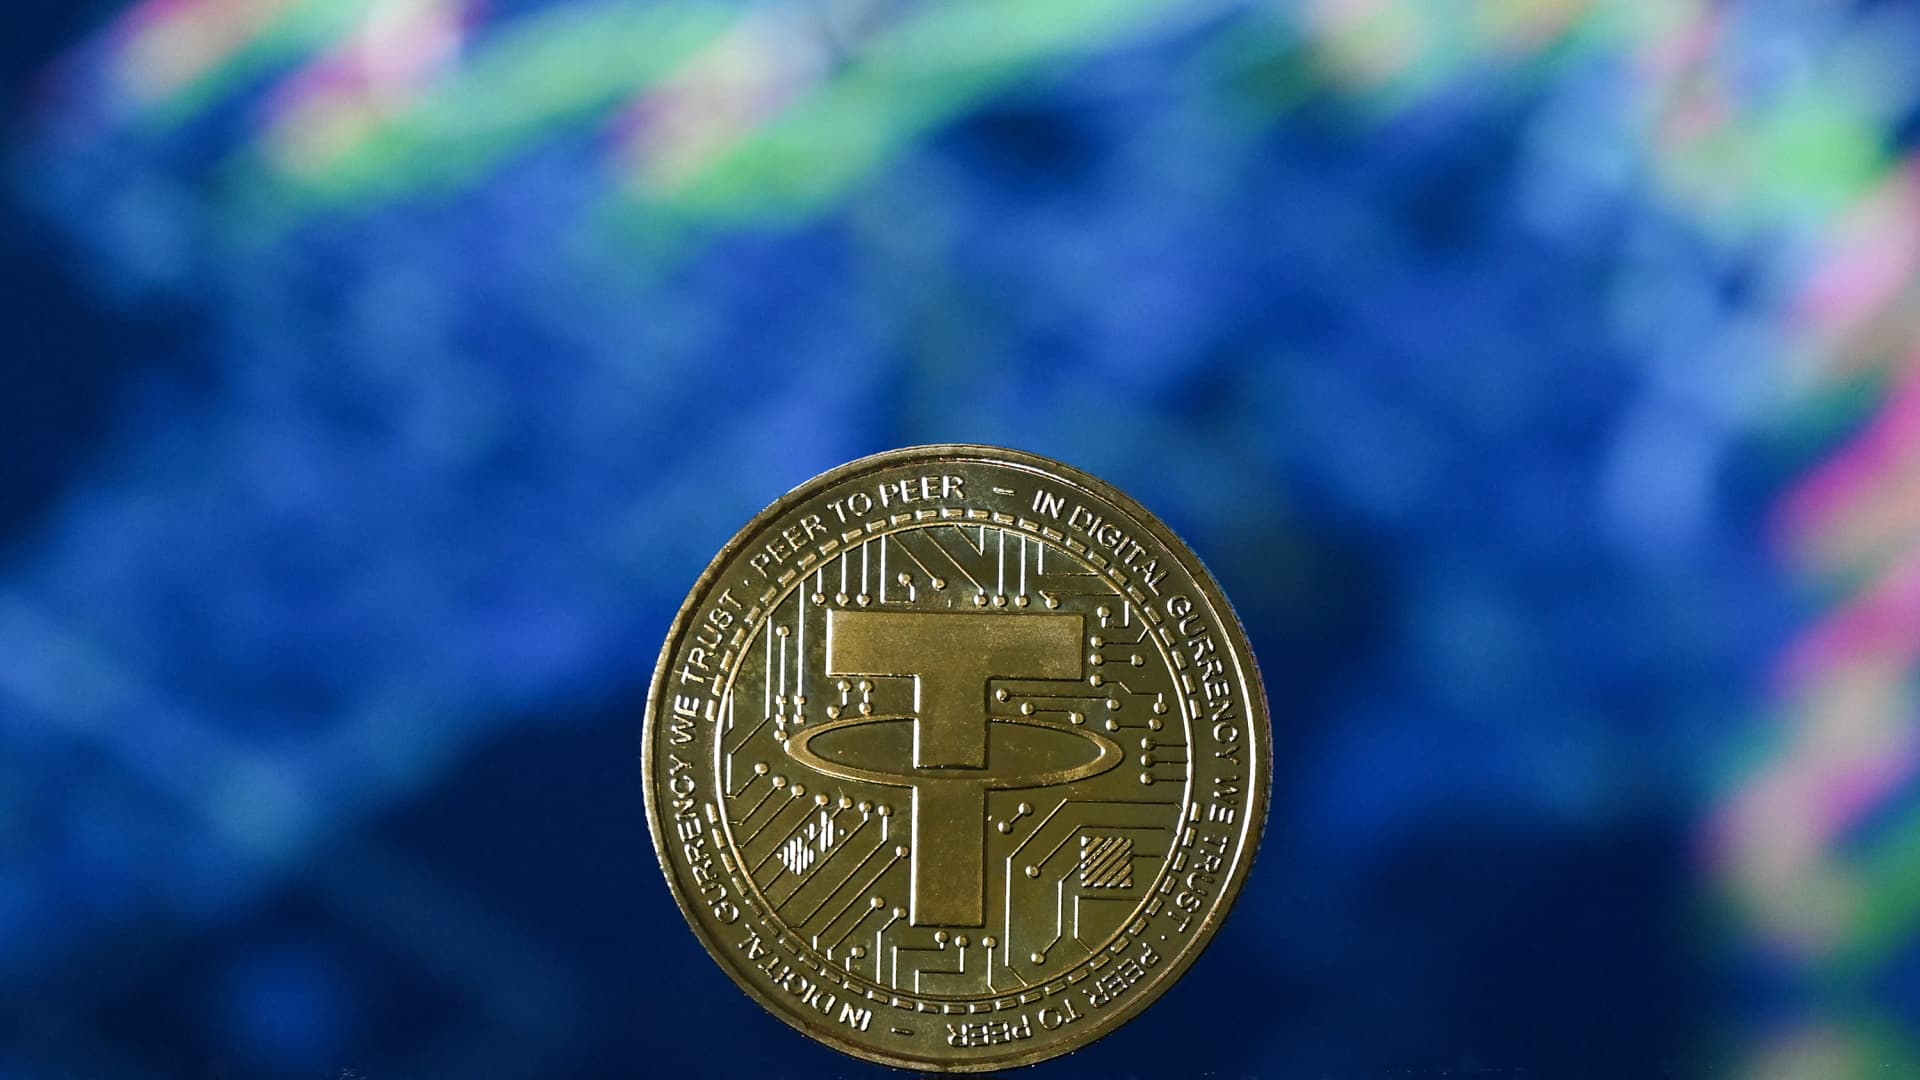 Tether records surprise profit as stablecoin giant aims to put reserve controversy behind it